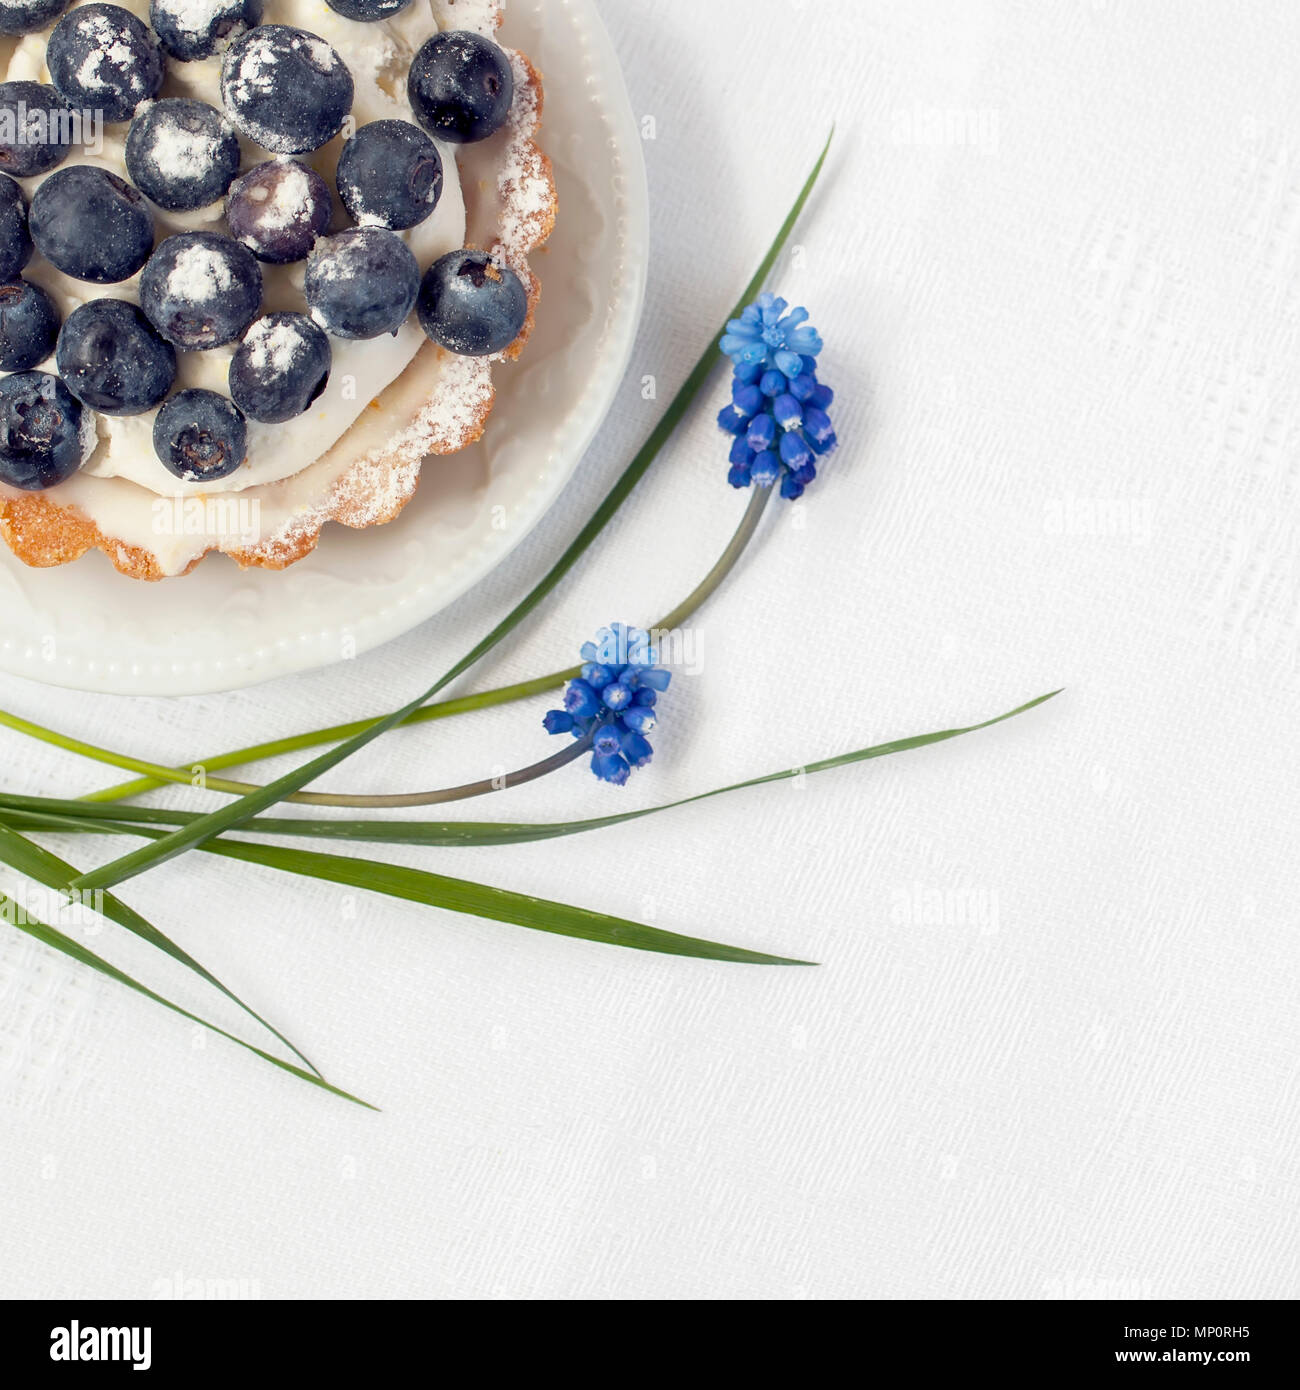 Fresh blueberry pie with vanilla custard in portion plate close-up, next to elegant blue flowers, , white napkin. Delicious and romantic summer berry dessert, copy space Stock Photo